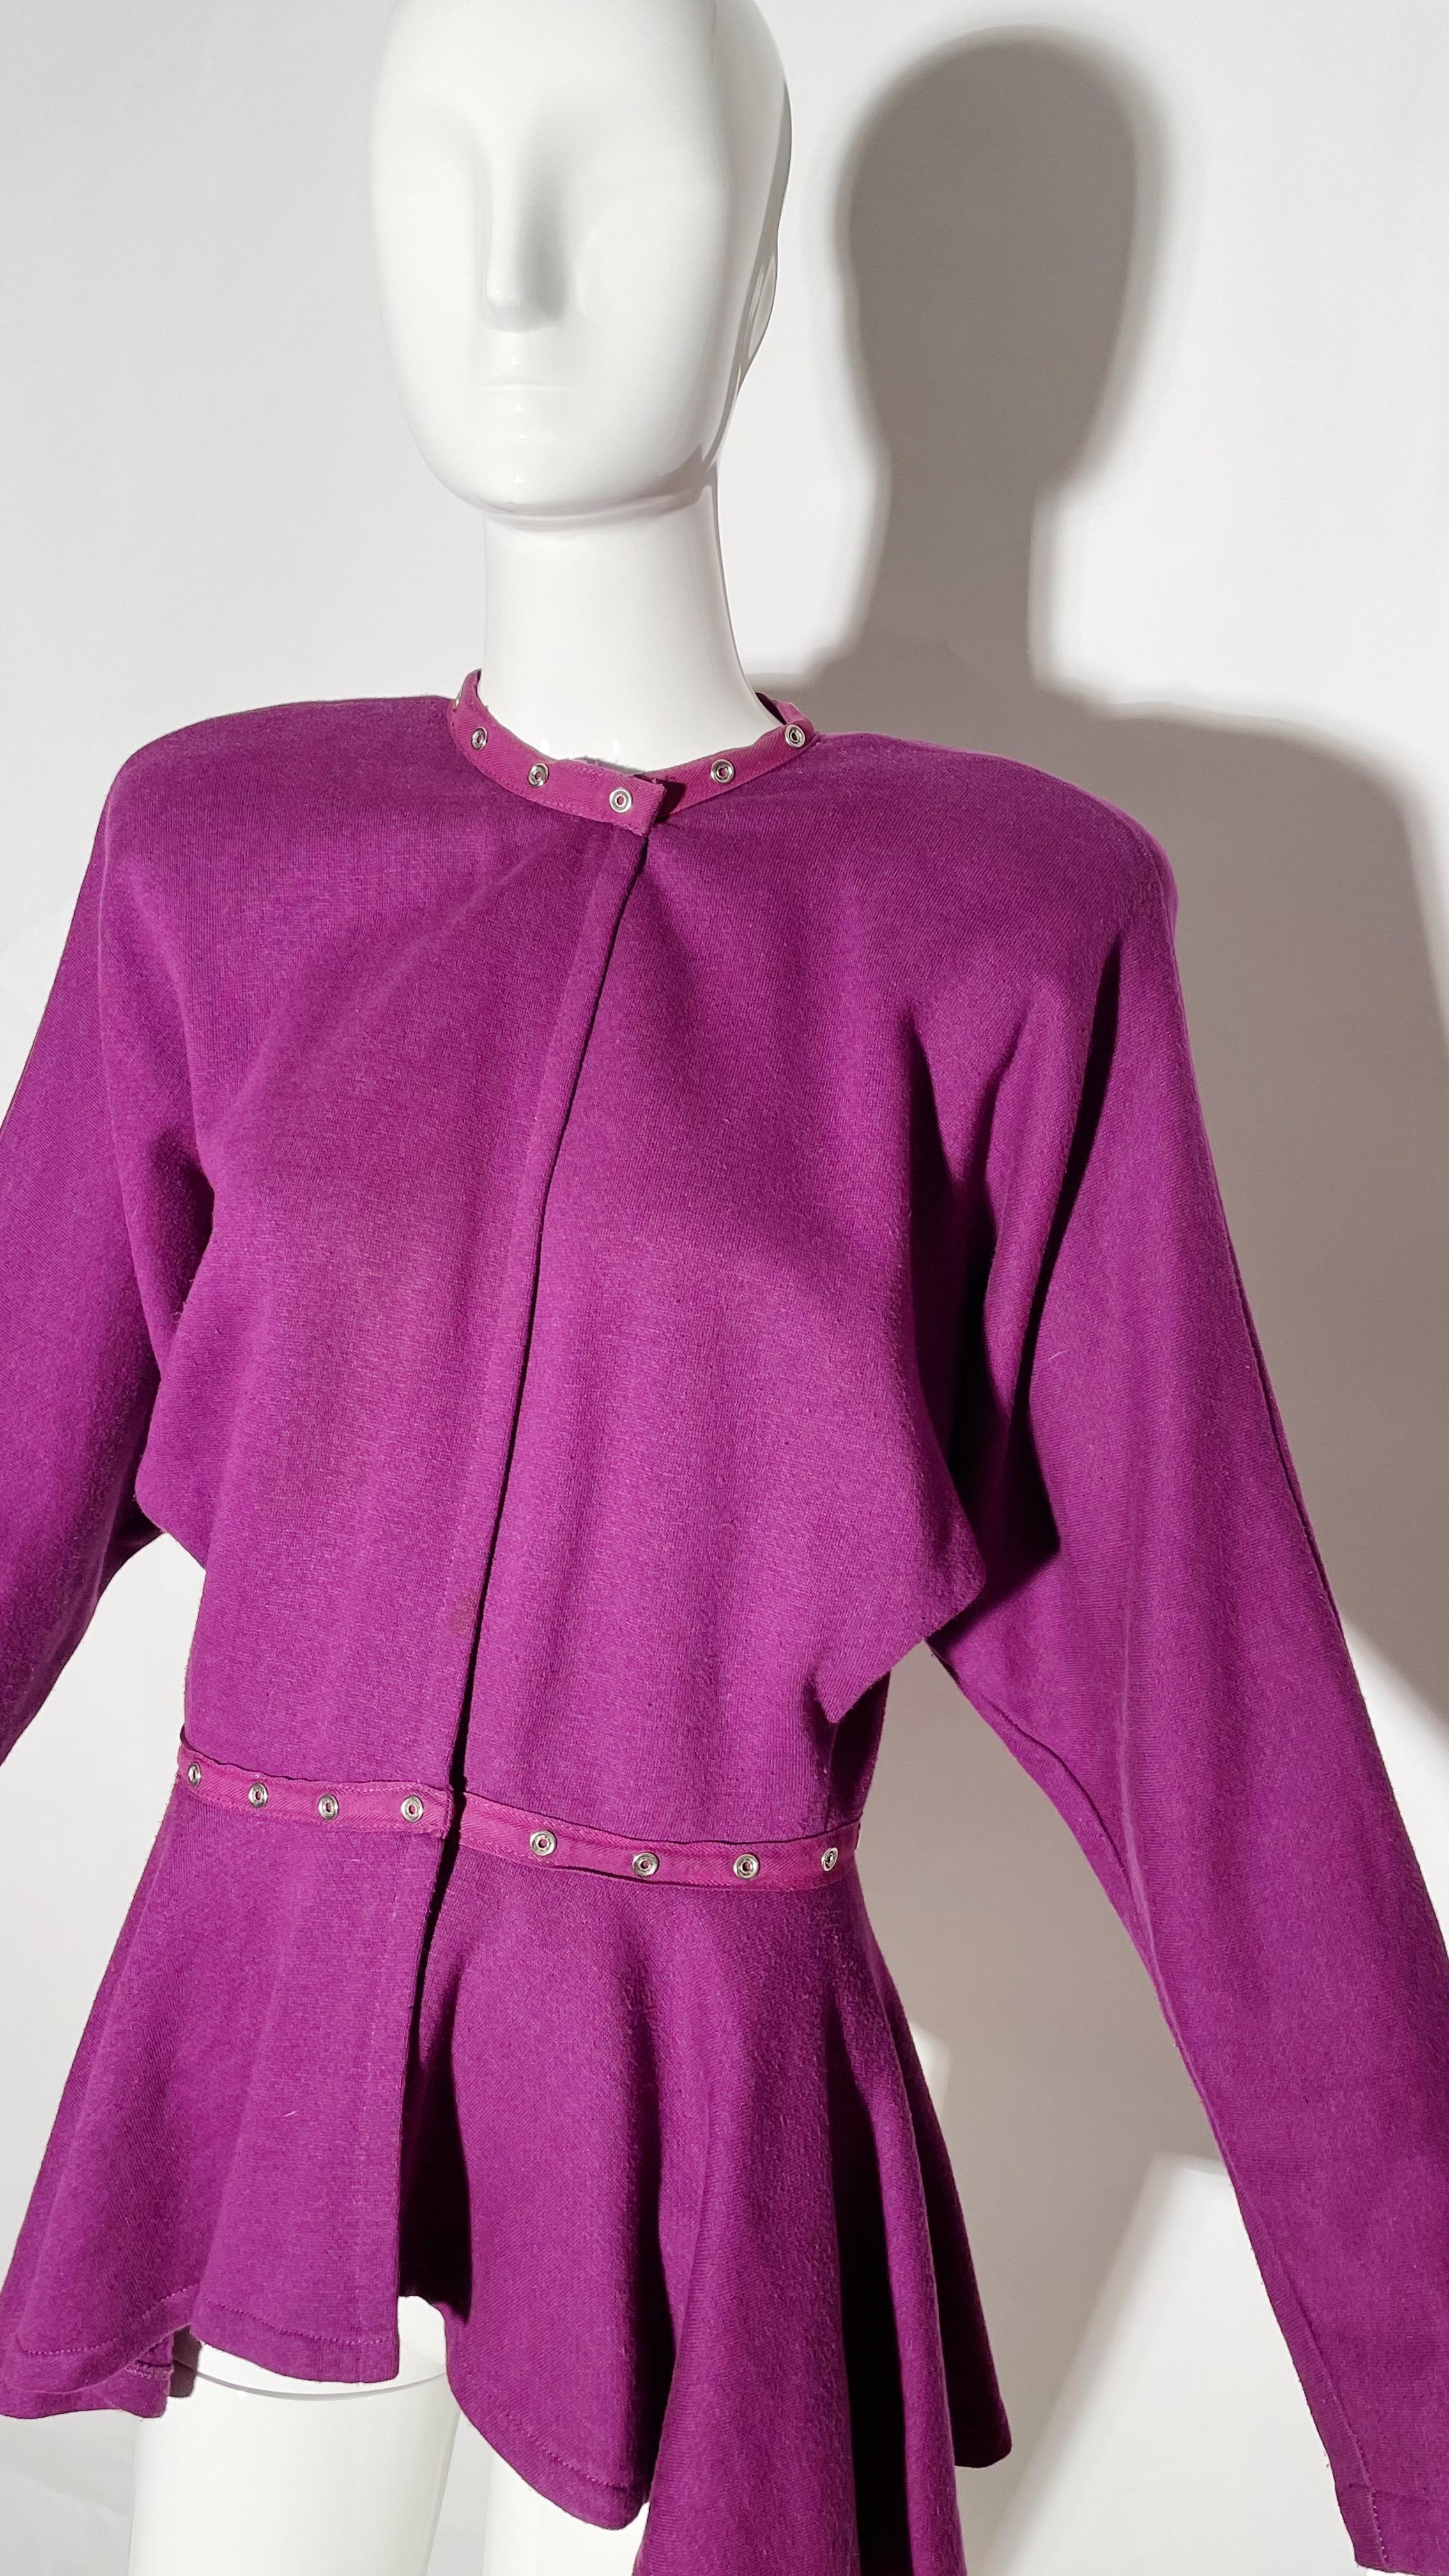 Norma Kamali Purple Sweatshirt Blouse  In Excellent Condition For Sale In Los Angeles, CA